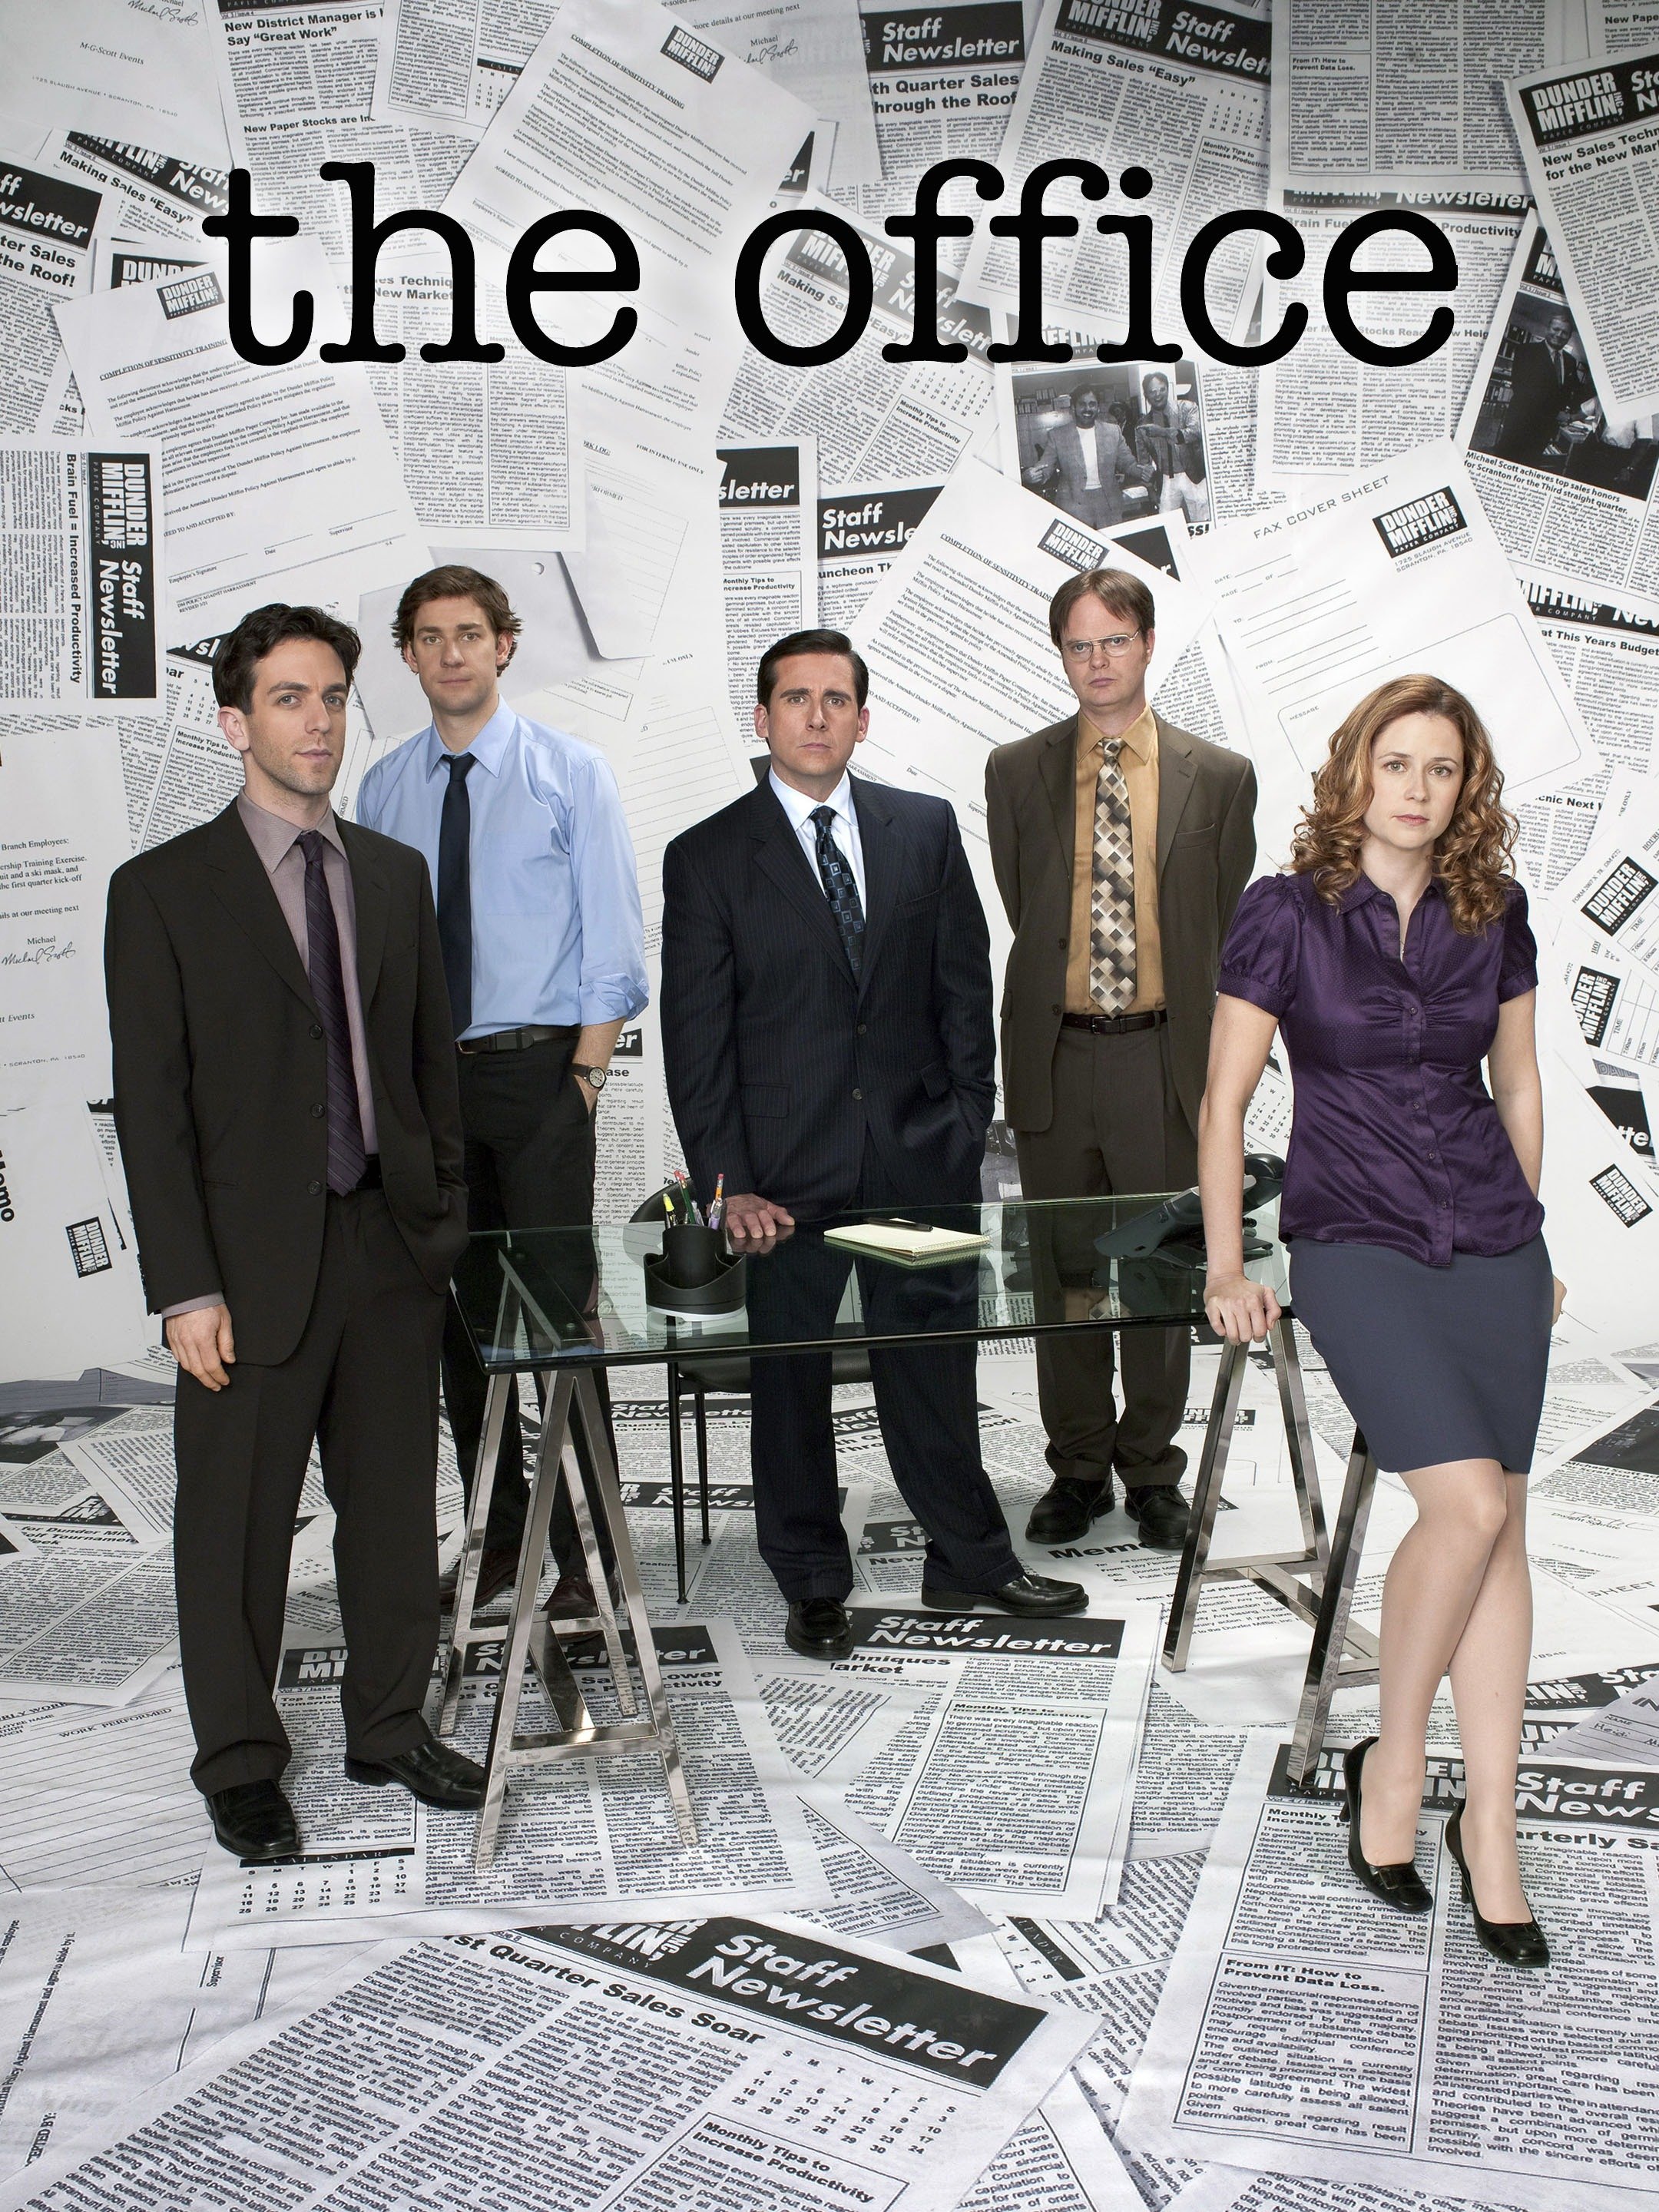 presentation about the office show